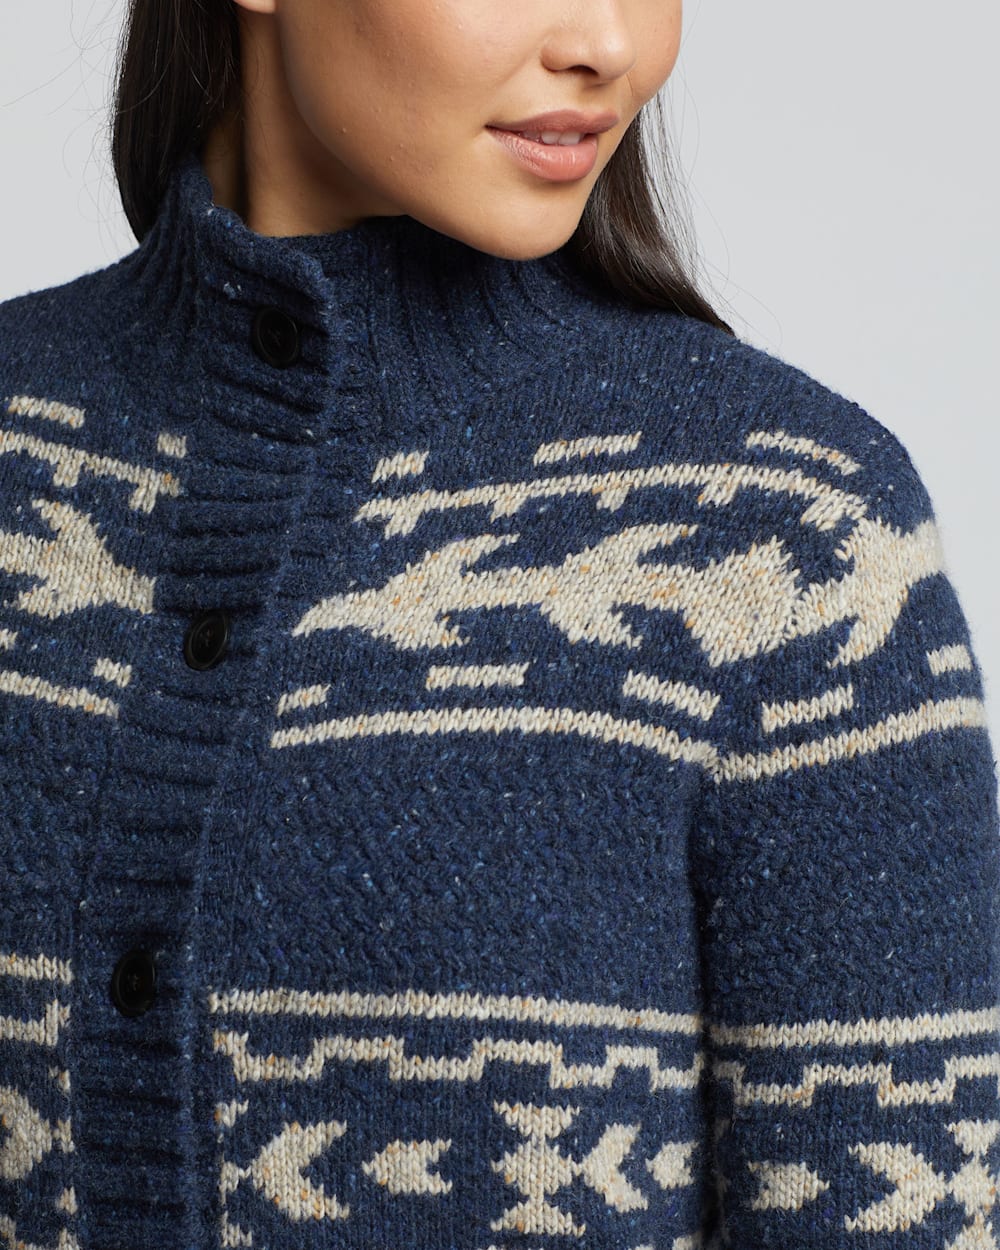 ALTERNATE VIEW OF WOMEN'S GRAPHIC DONEGAL MERINO CARDIGAN IN NAVY/OATMEAL image number 4